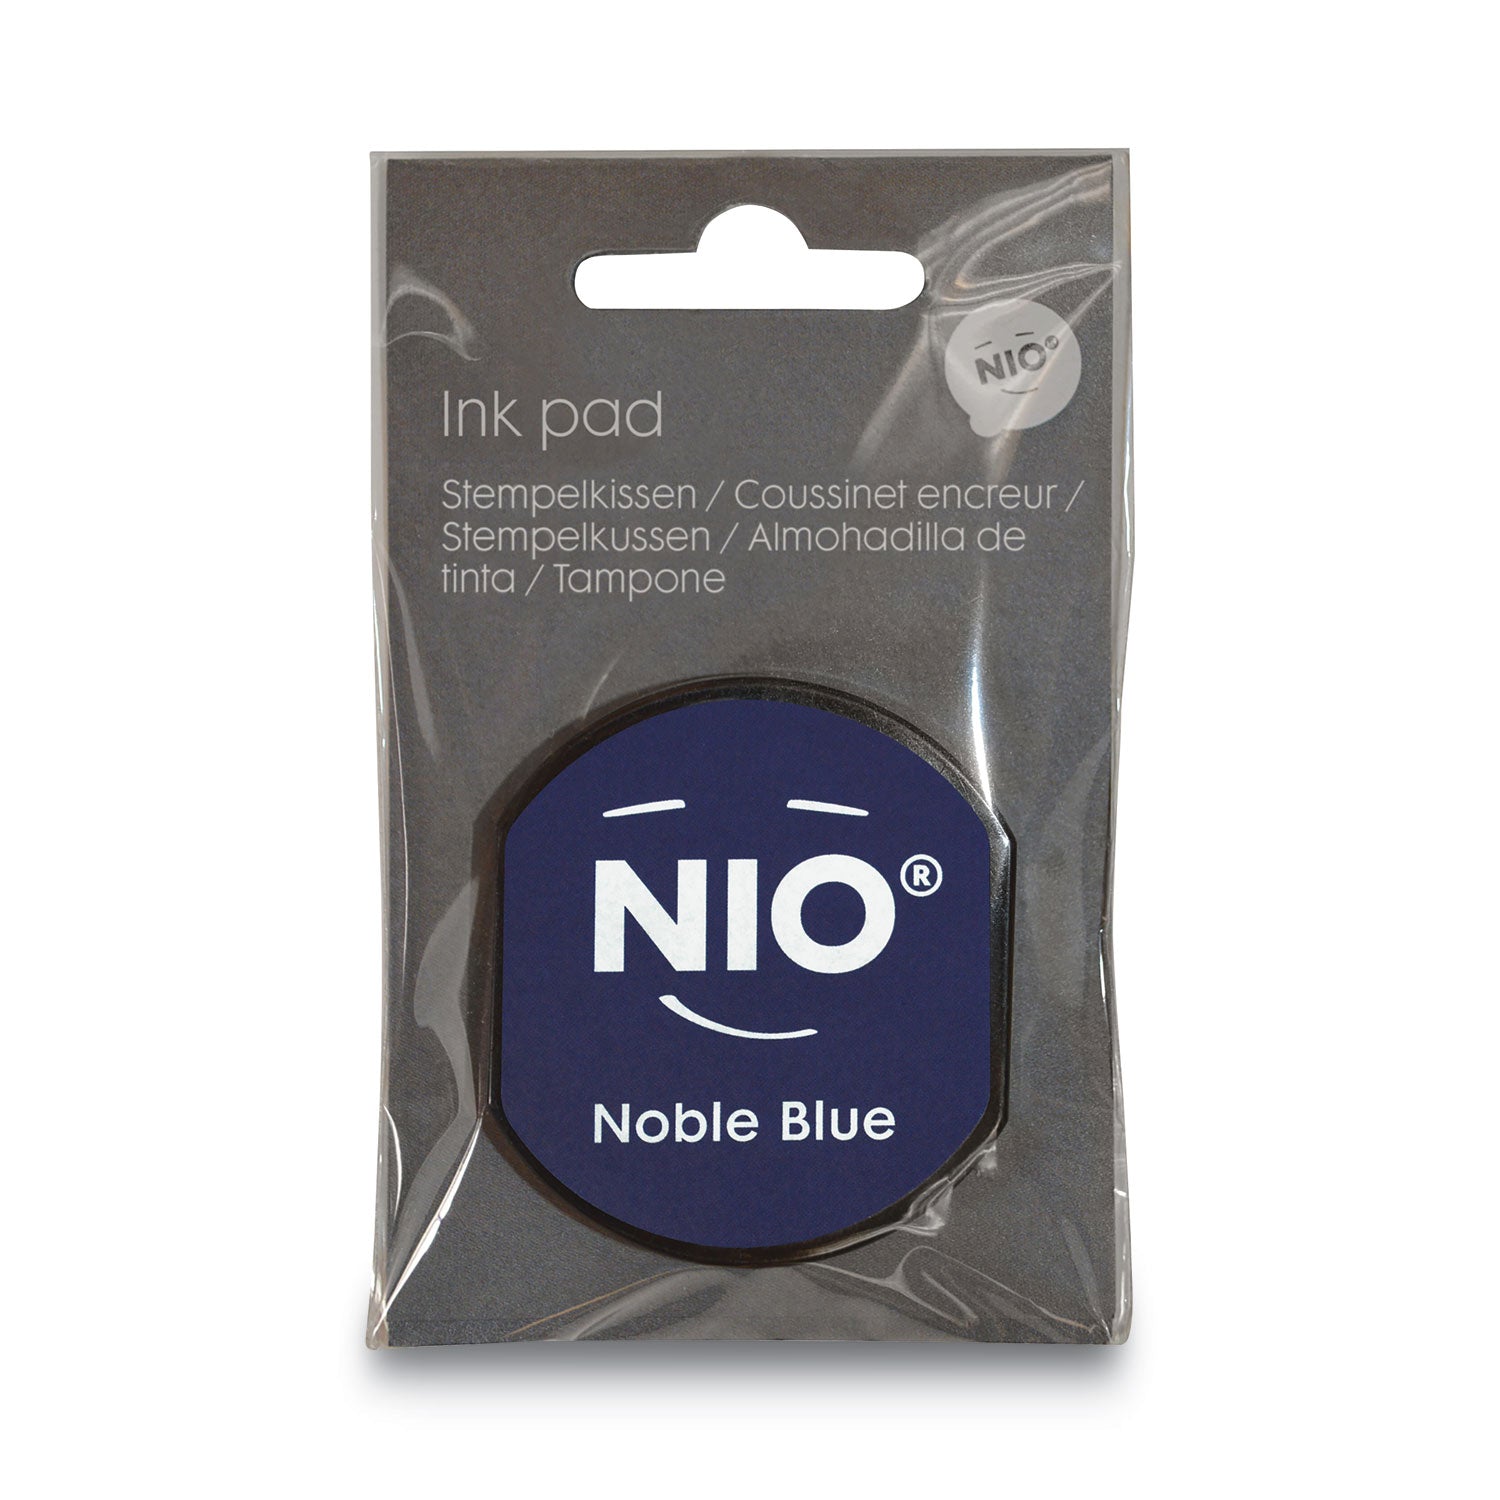 ink-pad-for-nio-stamp-with-voucher-275-x-275-noble-blue_cos071510 - 2